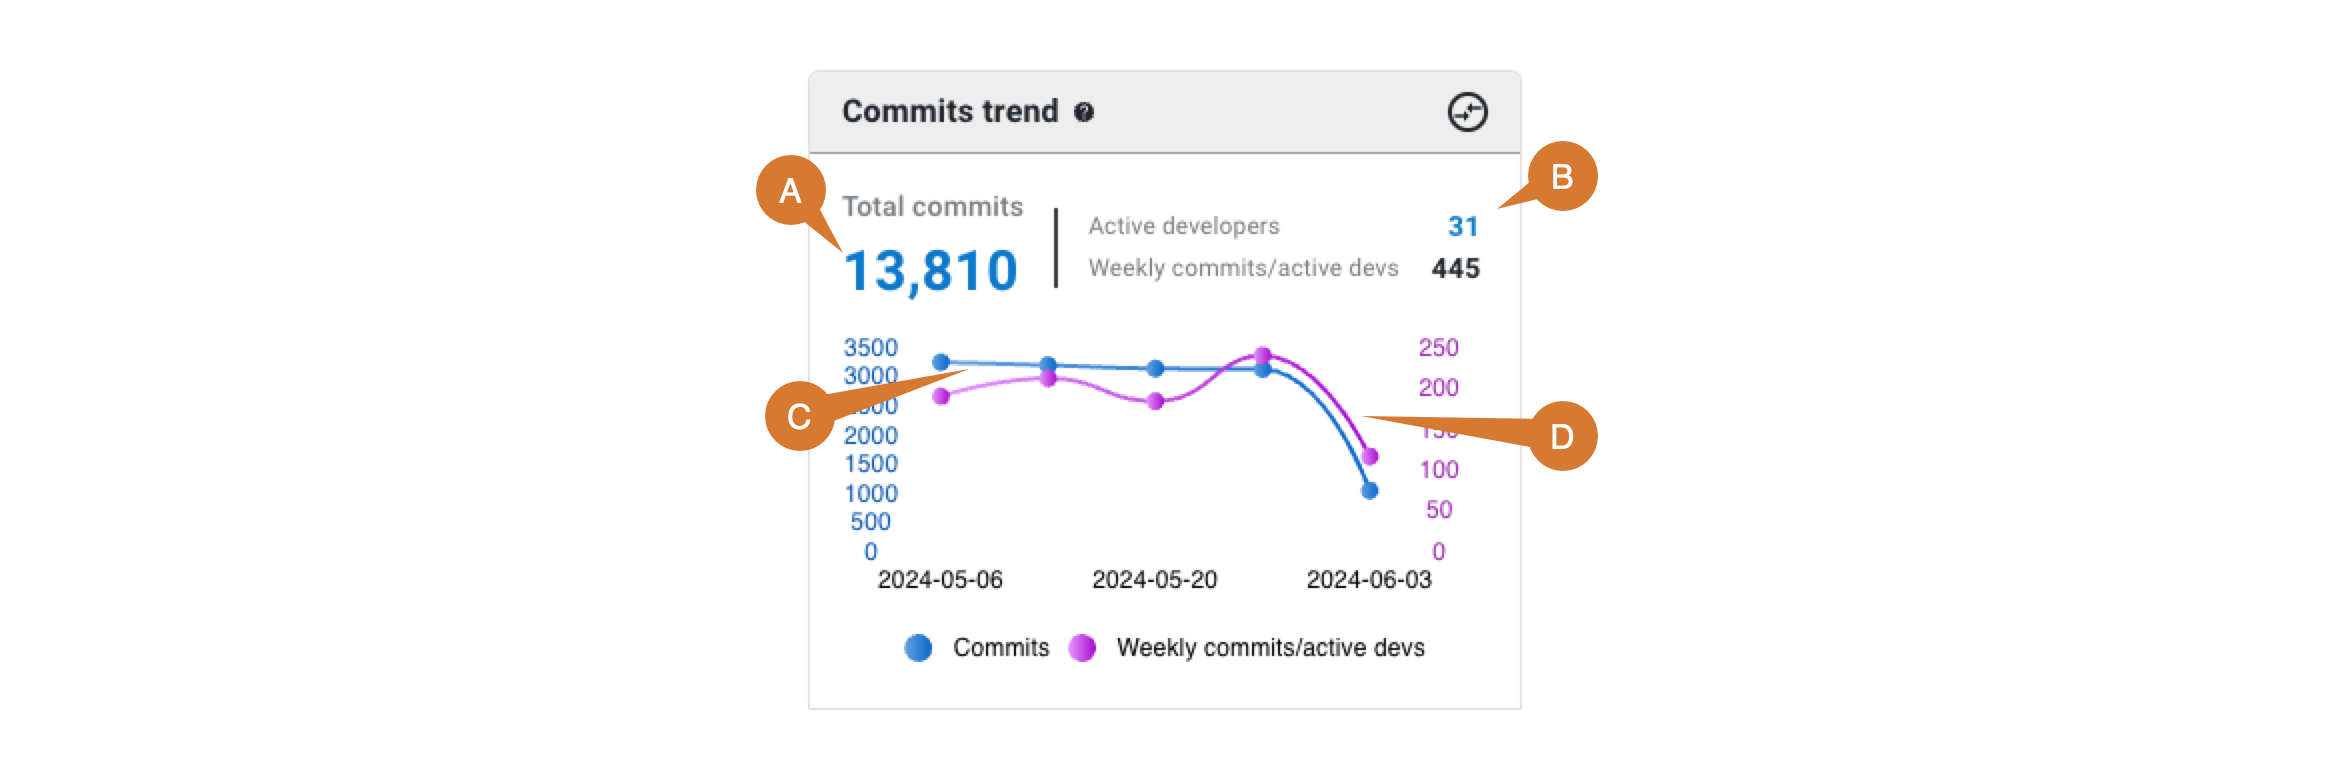 Commits overview